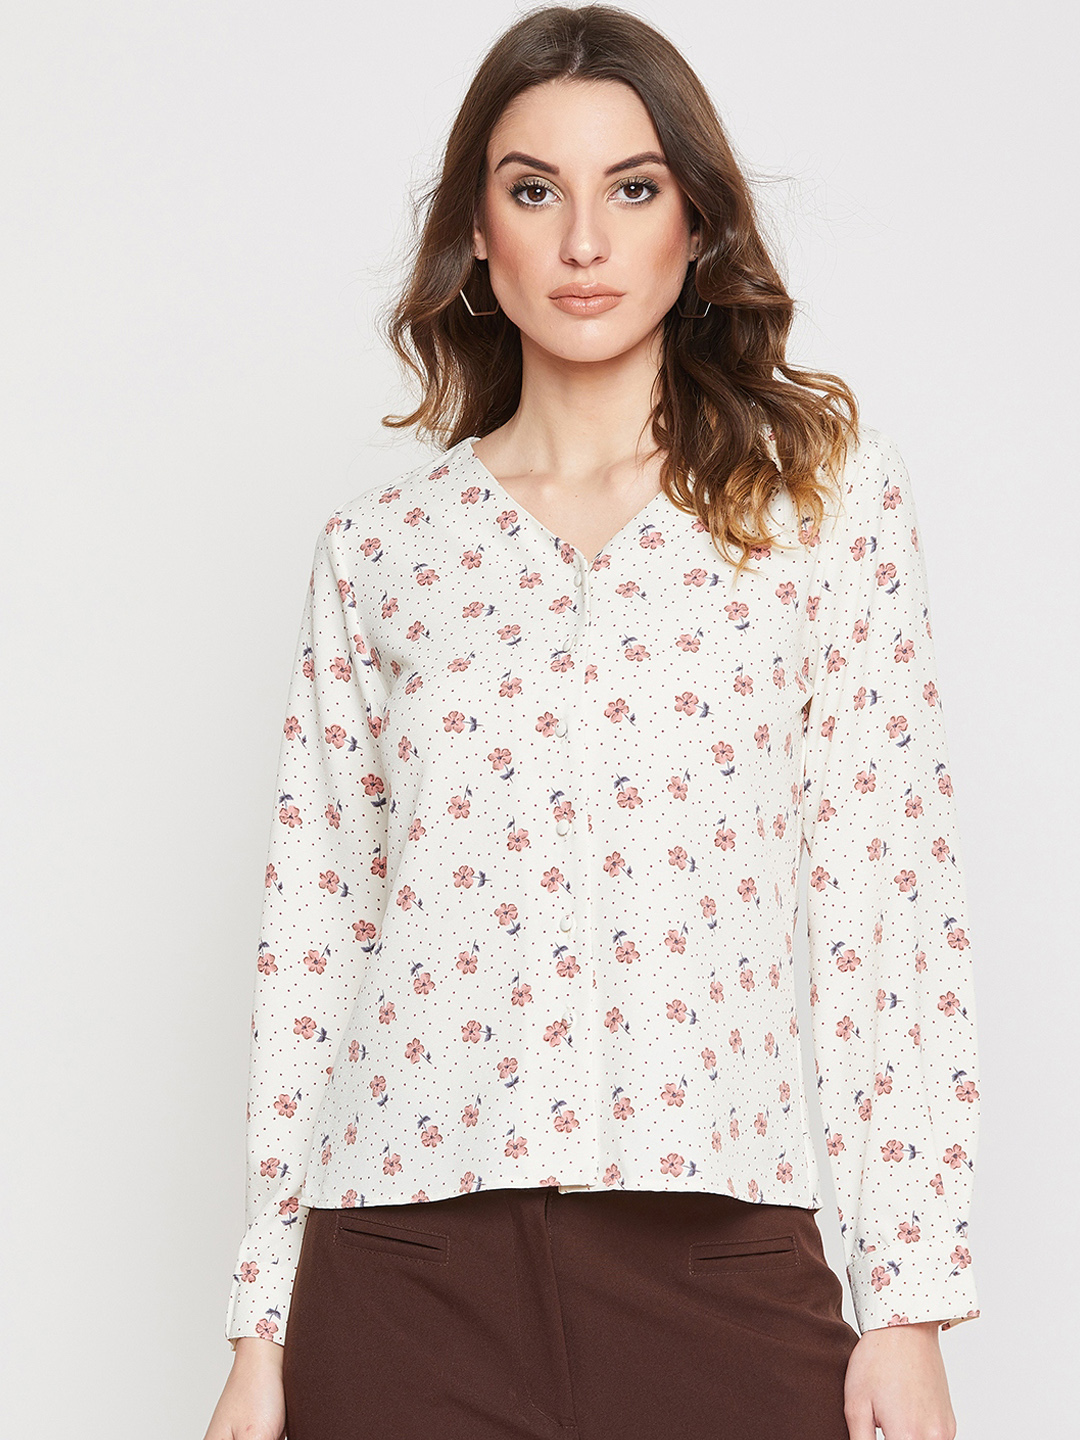 Marie Claire Women Off-White Regular Fit Printed Casual Shirt Price in India